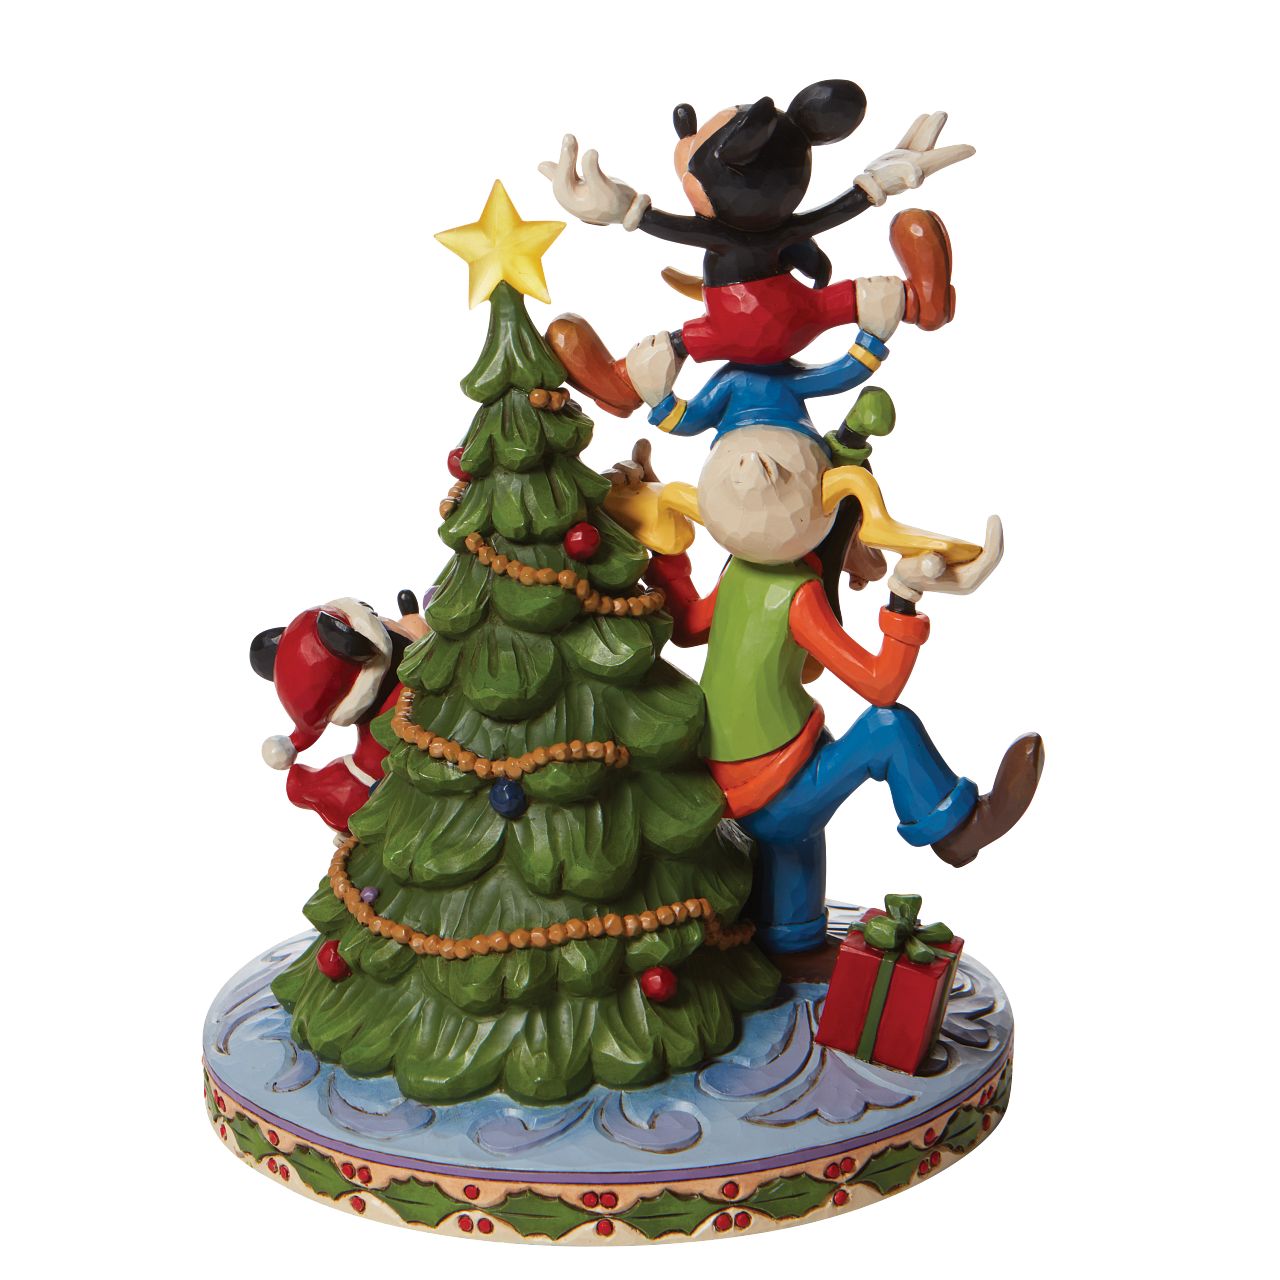 Jim Shore Merry Tree Trimming - Fab 5 Decorating Tree with illuminated  Mickey Mouse gets a hand and a boost decorating the tree this year. His friends form a teetering tower to hoist him to the top of the Mouse family tree while Minnie adds the finishing touches below in this Disney by Jim Shore design. 